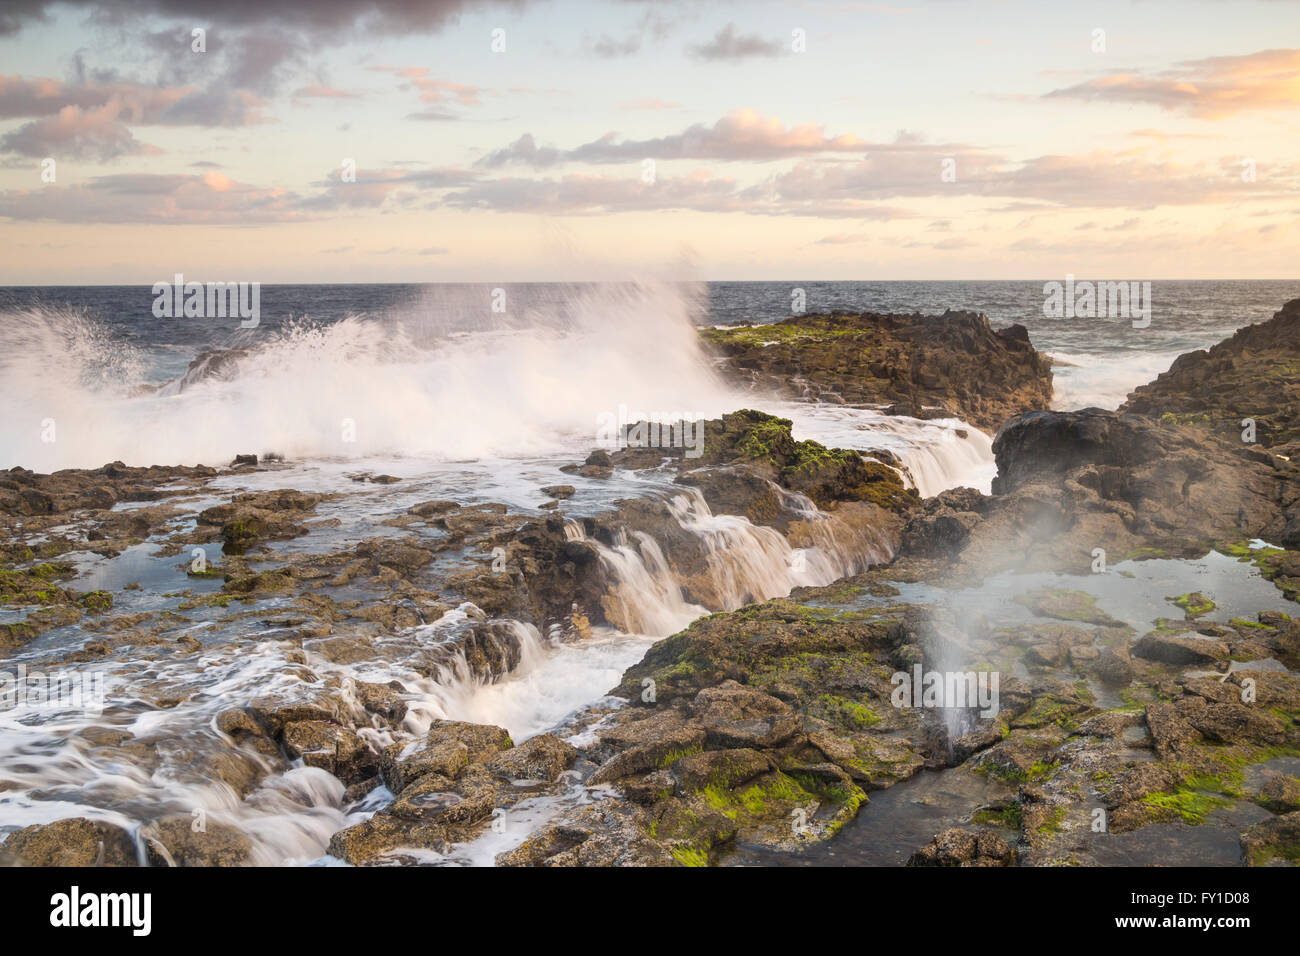 Las Palmas, Gran Canaria, Canary Islands, Spain, 20th April 2016. Weather: A glorious sunrise on Gran Canaria as photographer photographs waves crashing over rugged volcanic coast using long exposure in pre dawn light. Credit:  Alan Dawson News/Alamy Live News Stock Photo